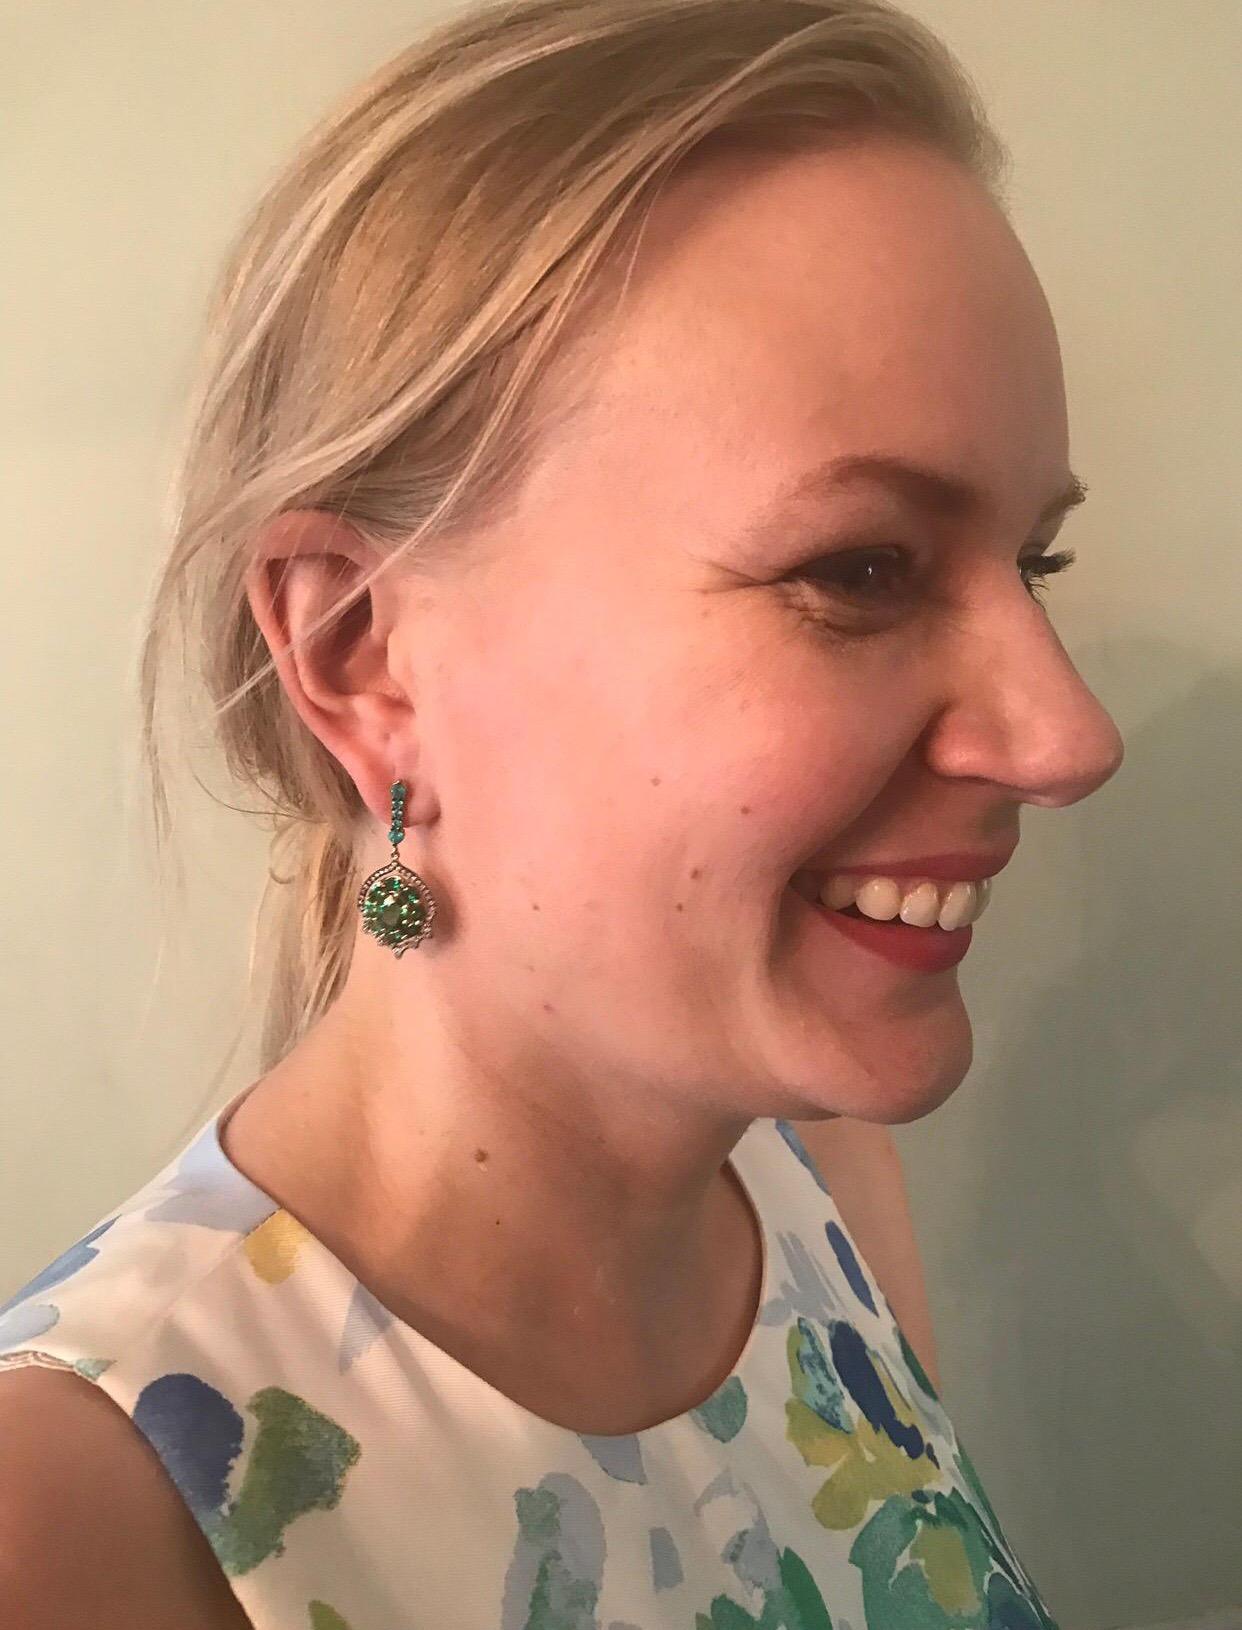 The Bespoke Green Garnet, (Tsavorite) Oval Center stones Are over 2 CT's Each, Which makes these Earrings Quite Unique, Surrounded By Smaller Oval Shape Tsavorites, Accented With Colorless Diamonds And Brazilian Paraiba Tourmalines. Color